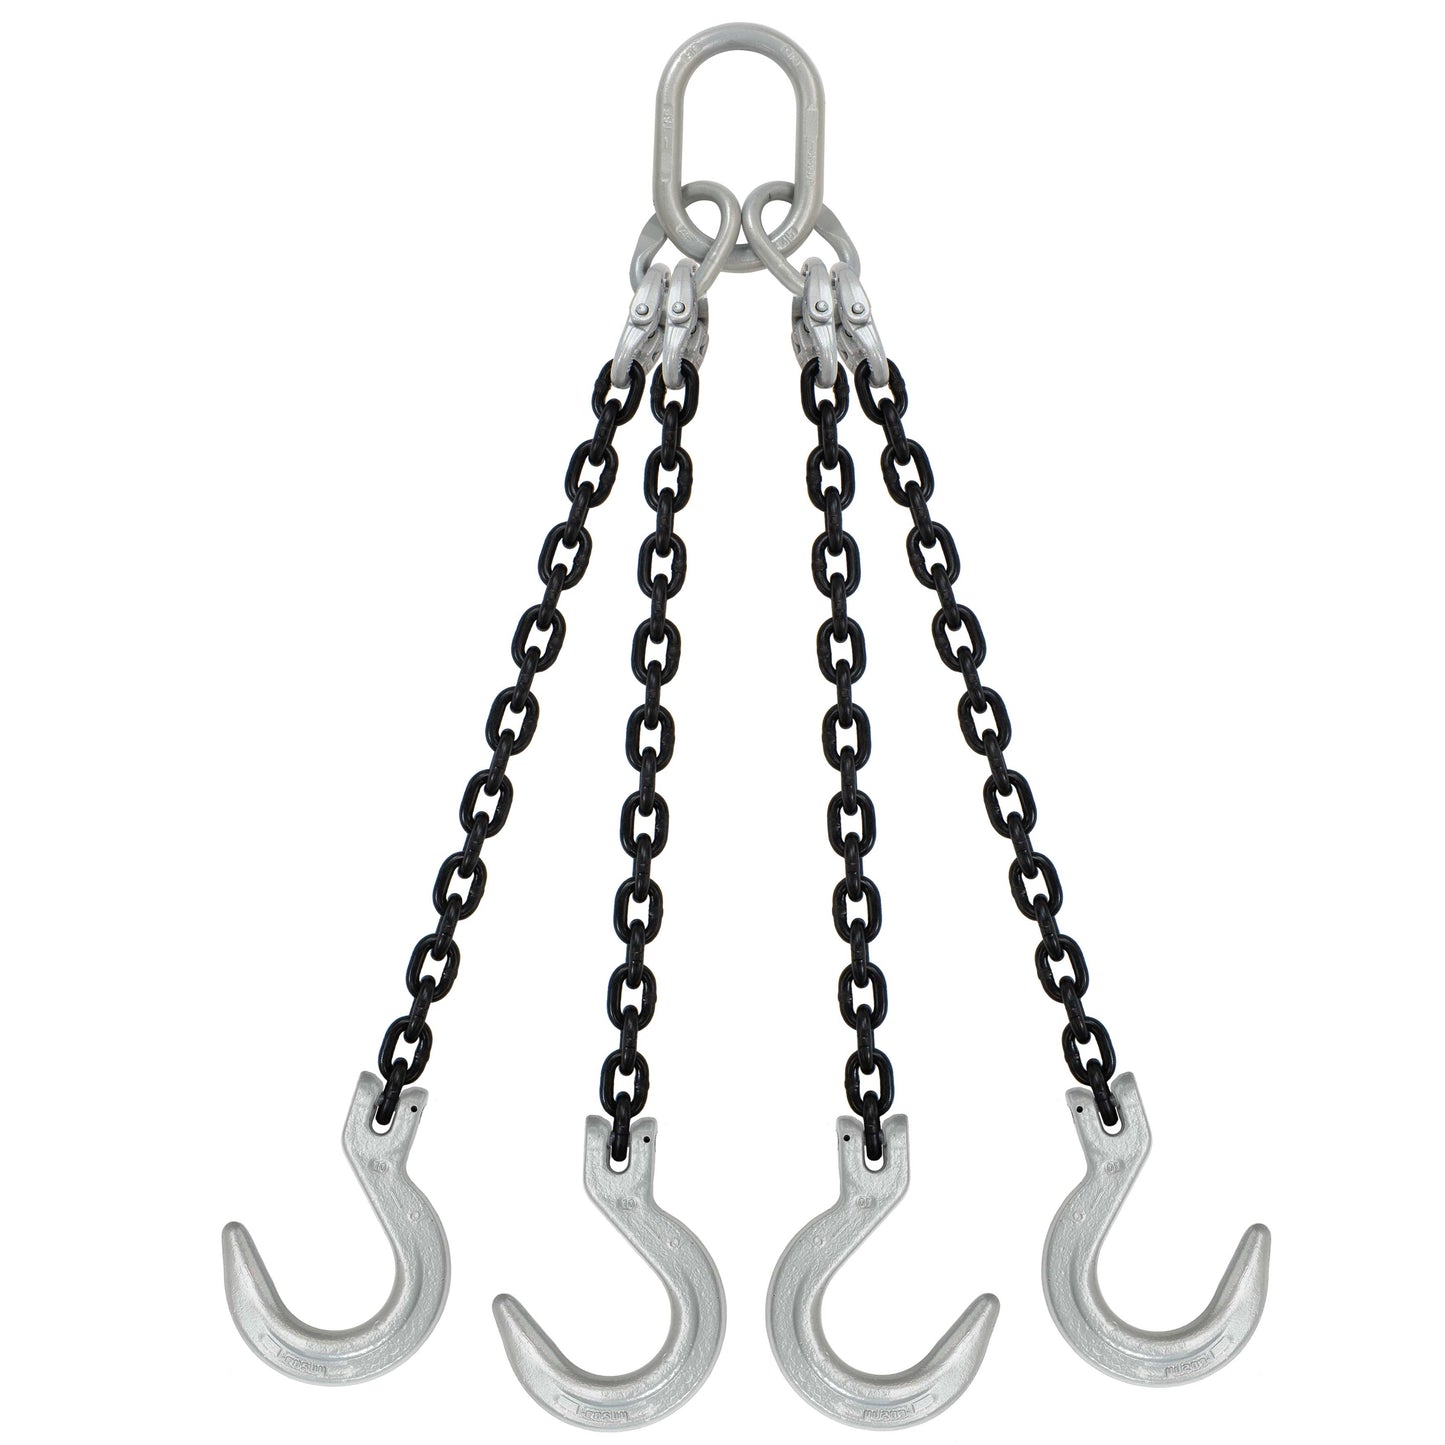 932 inch x 8 foot Domestic 4 Leg Chain Sling w Crosby Foundry Hooks Grade 100 image 1 of 2